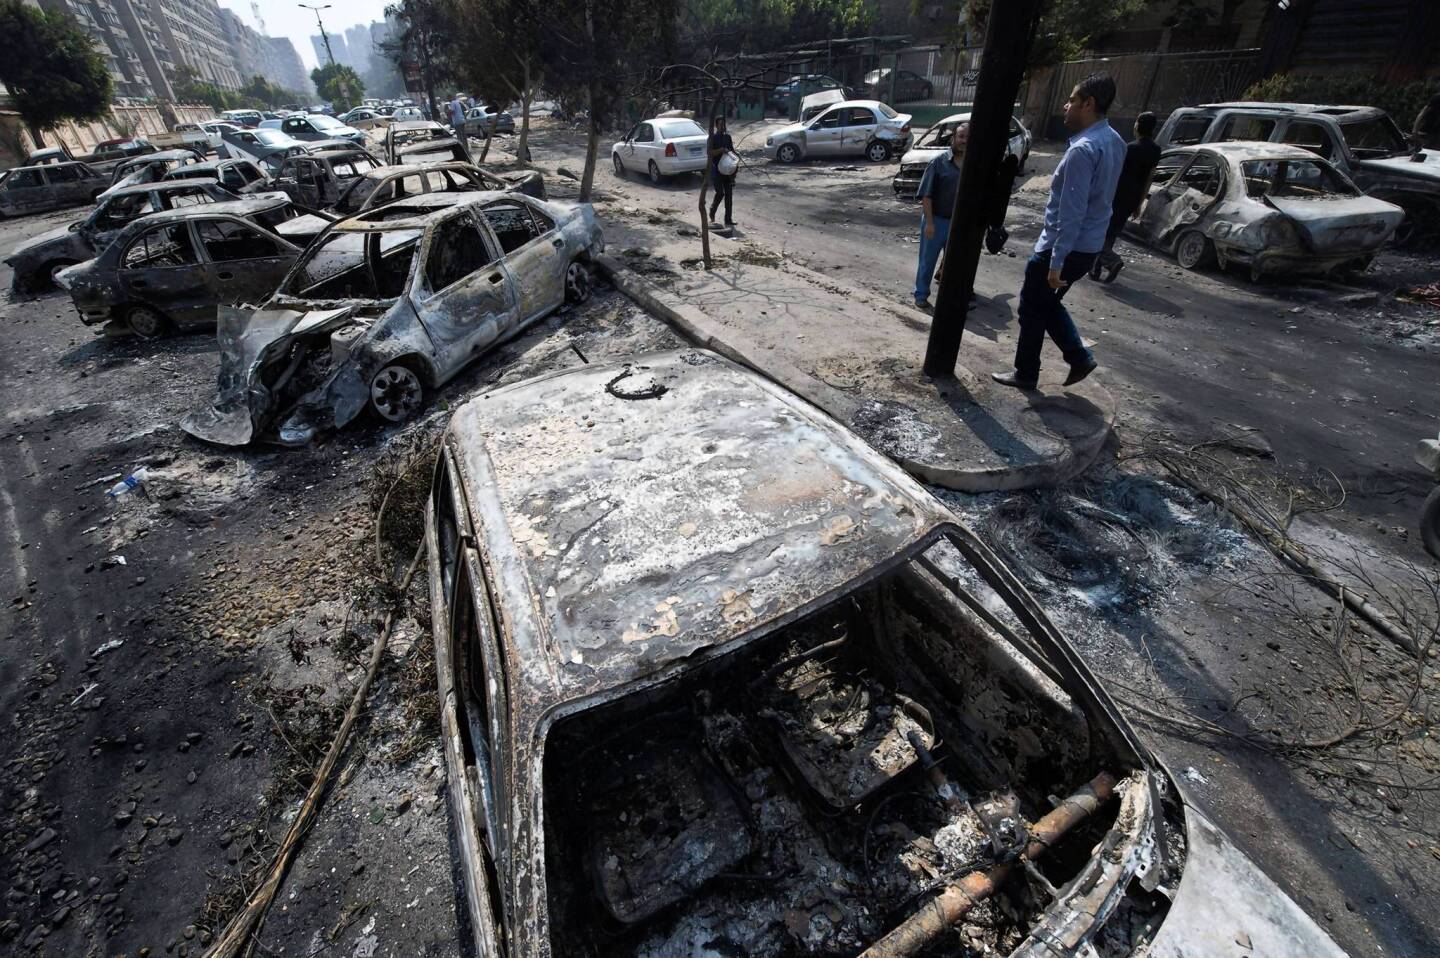 Egyptians pass by burnt vehicles outside the destroyed camp of ousted Mohammed Morsi supporters outside Rabaa al-Adawiya mosque in Cairo.